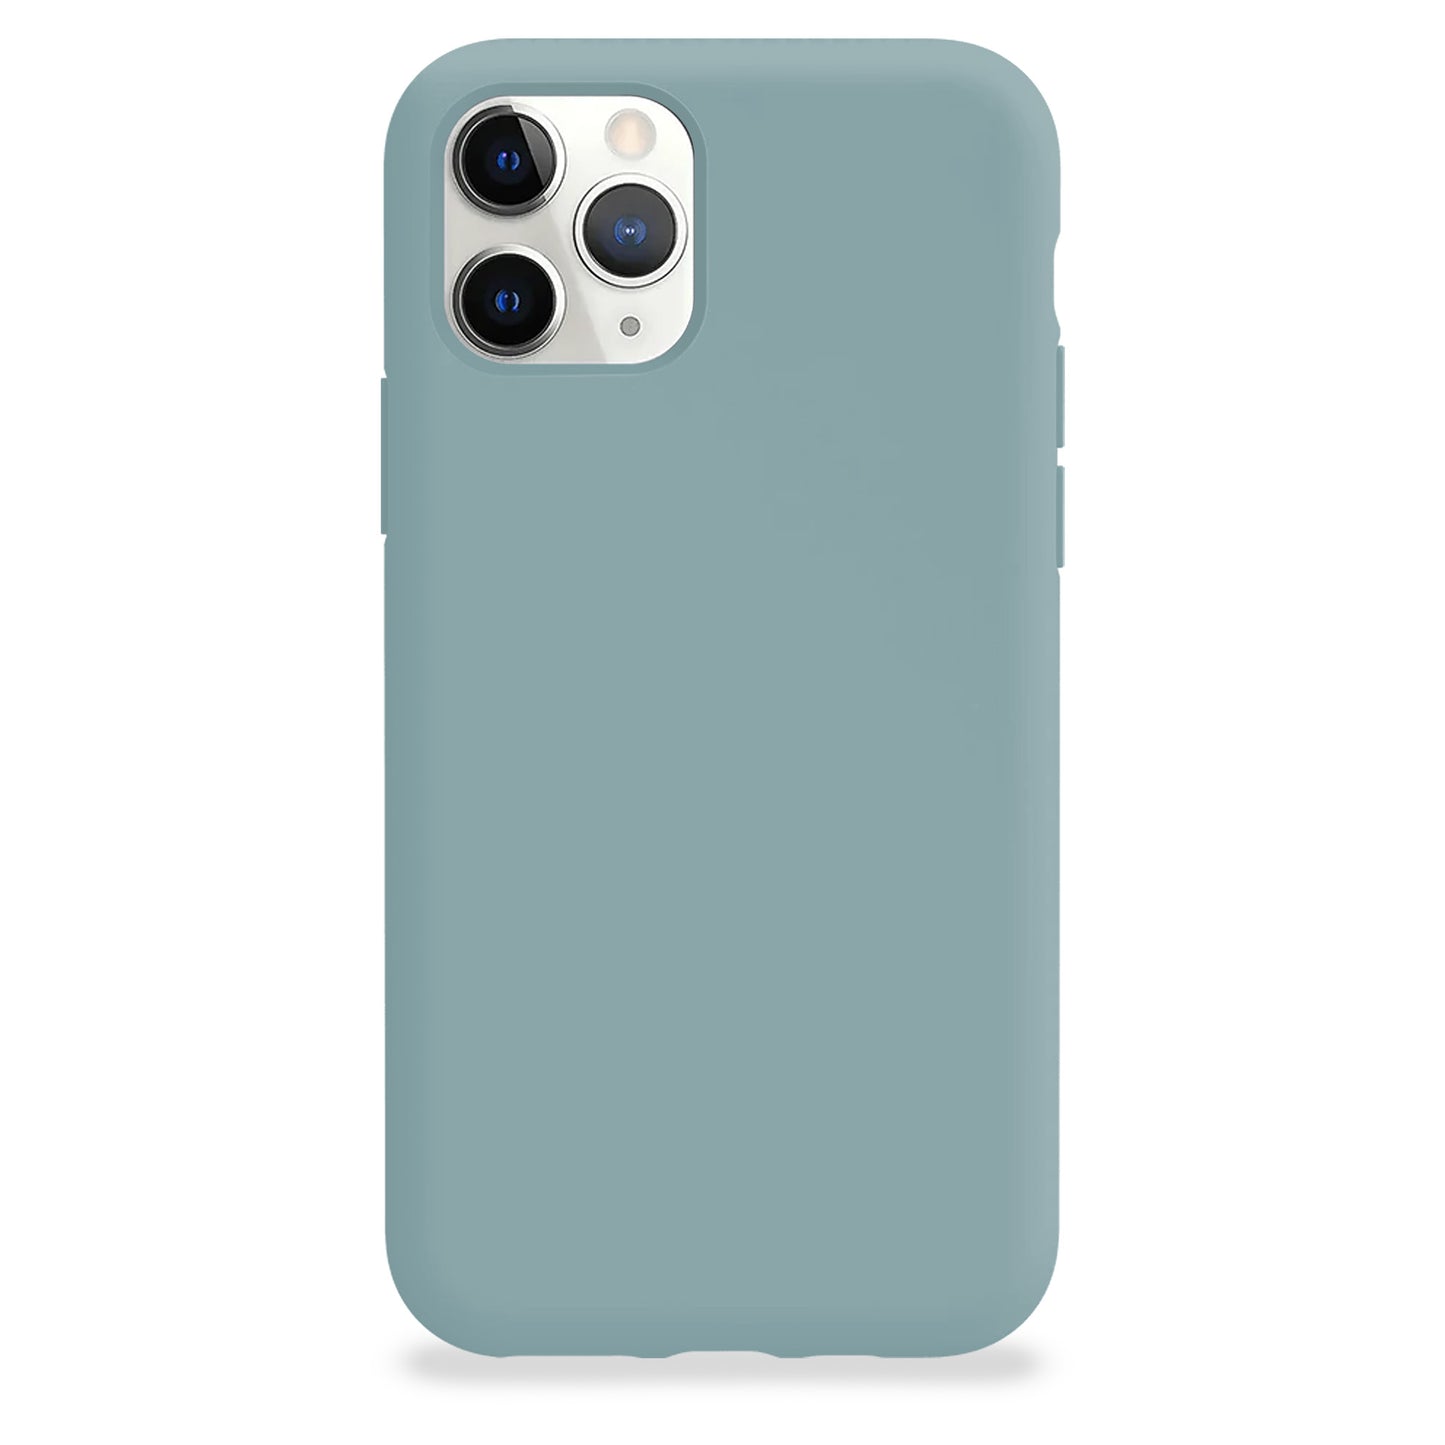 Gem Green Silicone Case for iPhone and Samsung